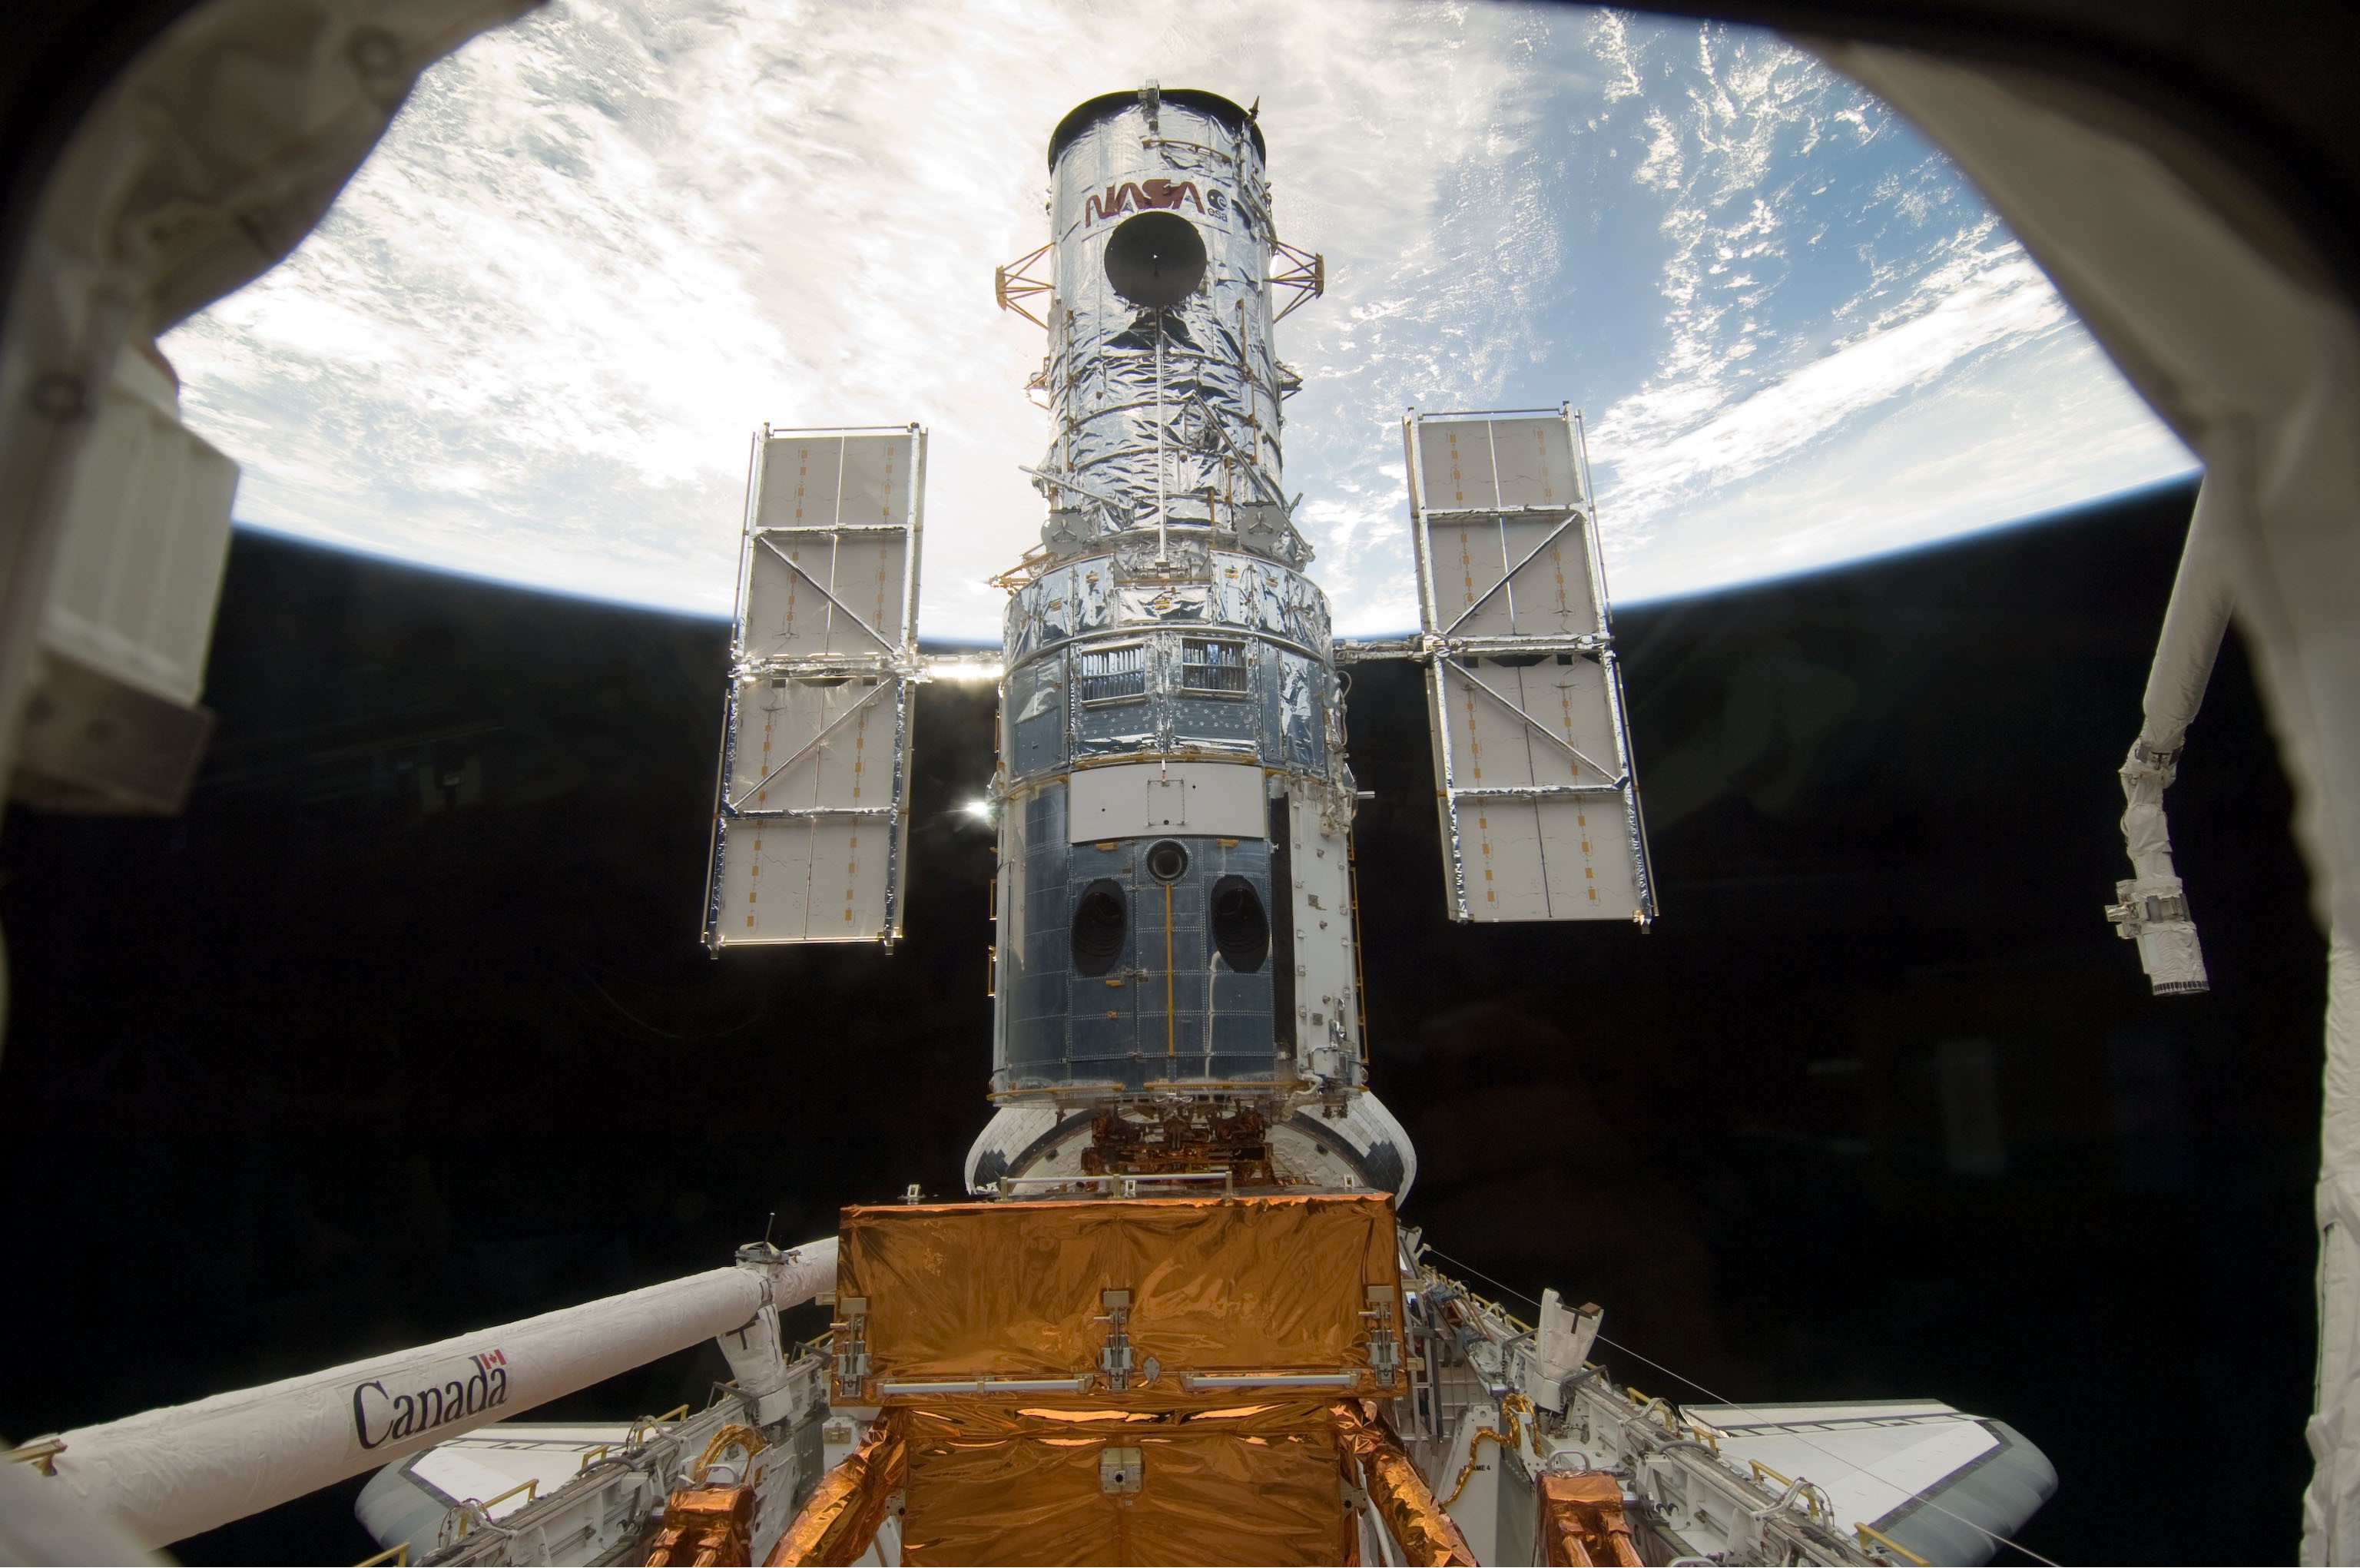 Hubble secured in Atlantis' payload bay